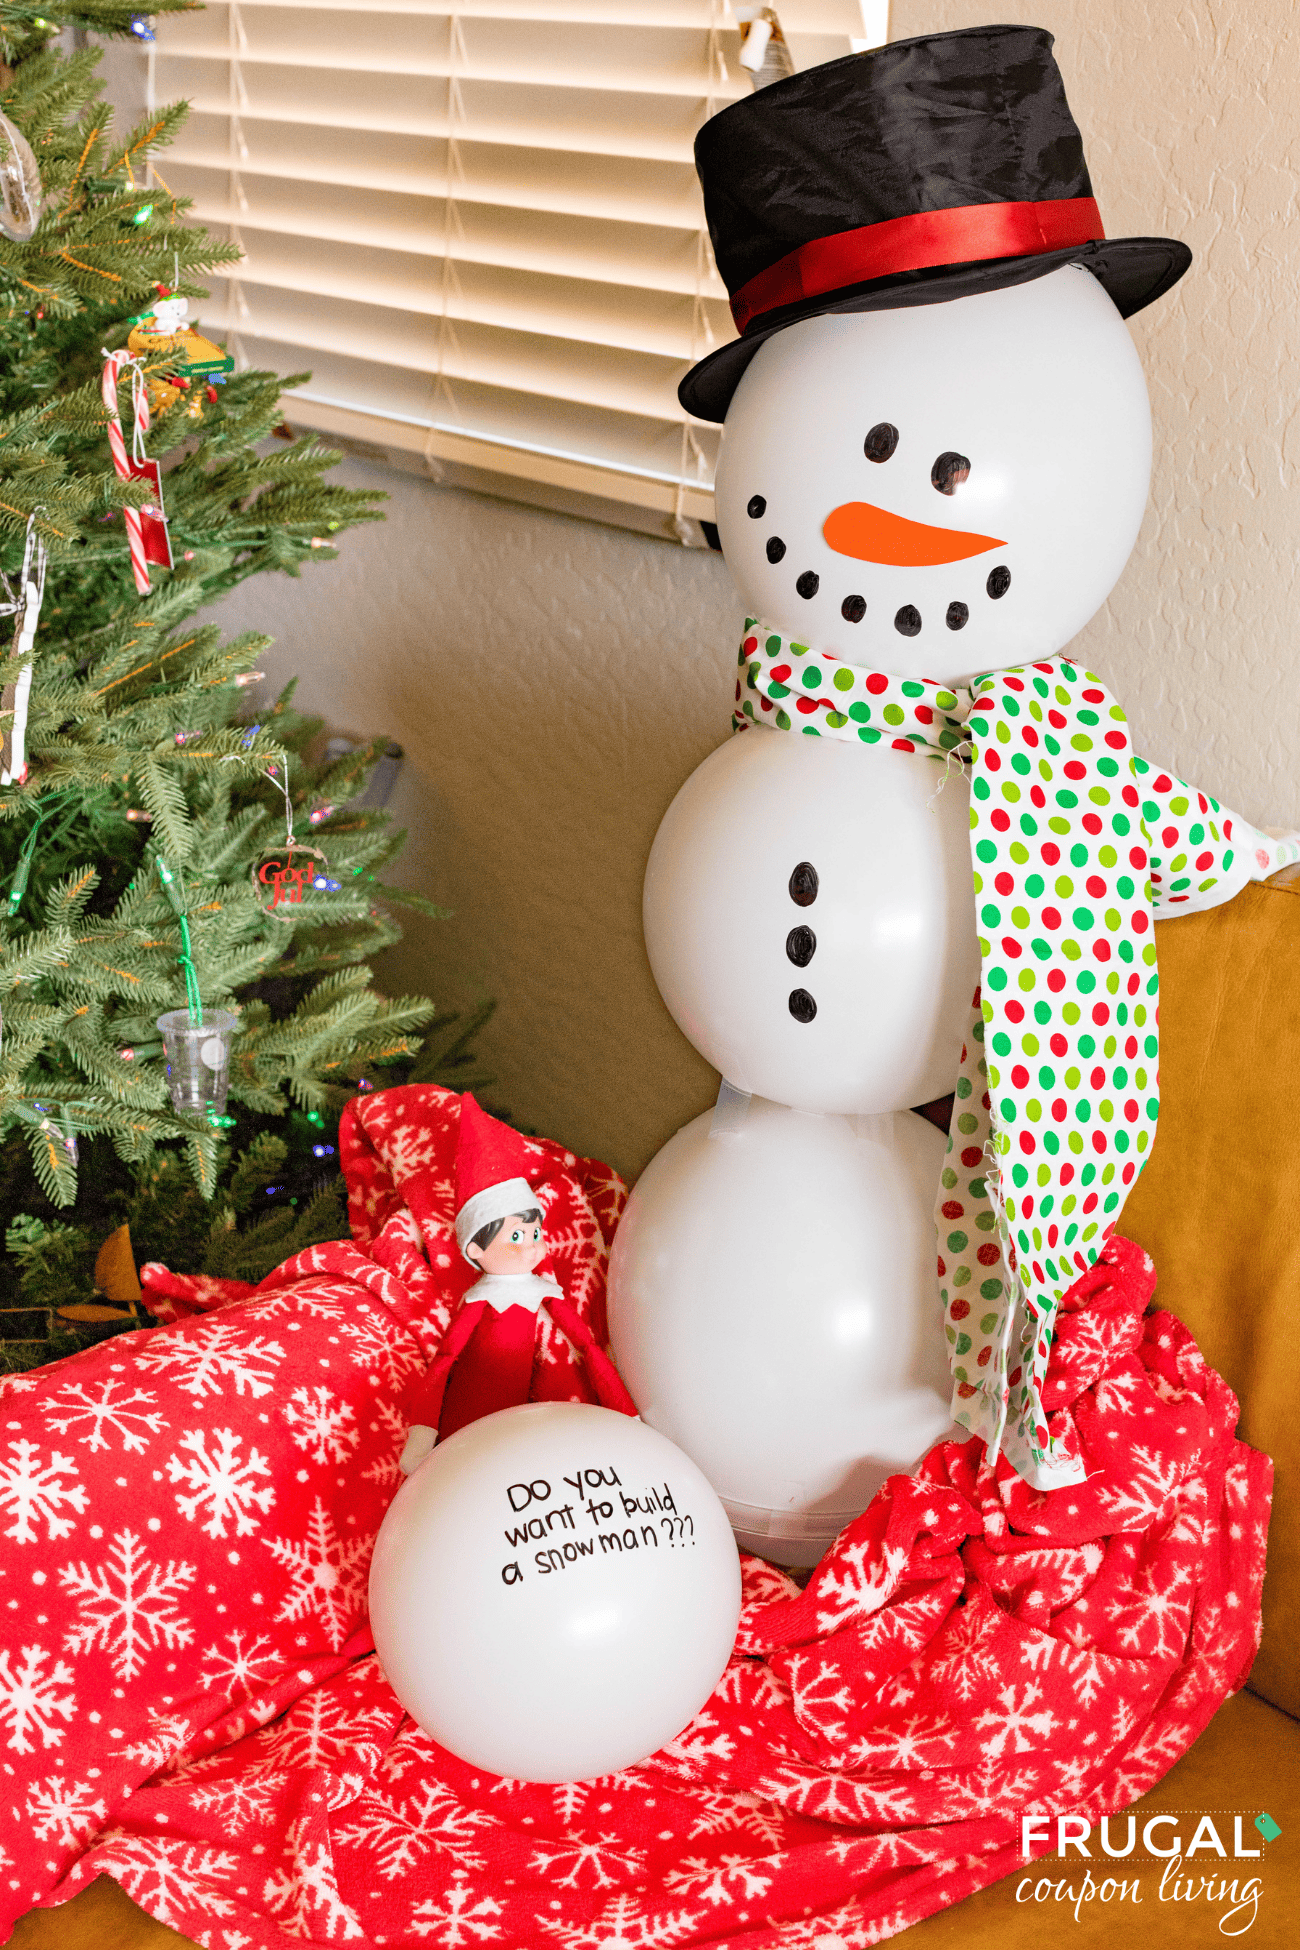 miniature balloon snowman made by the Elf on the Shelf